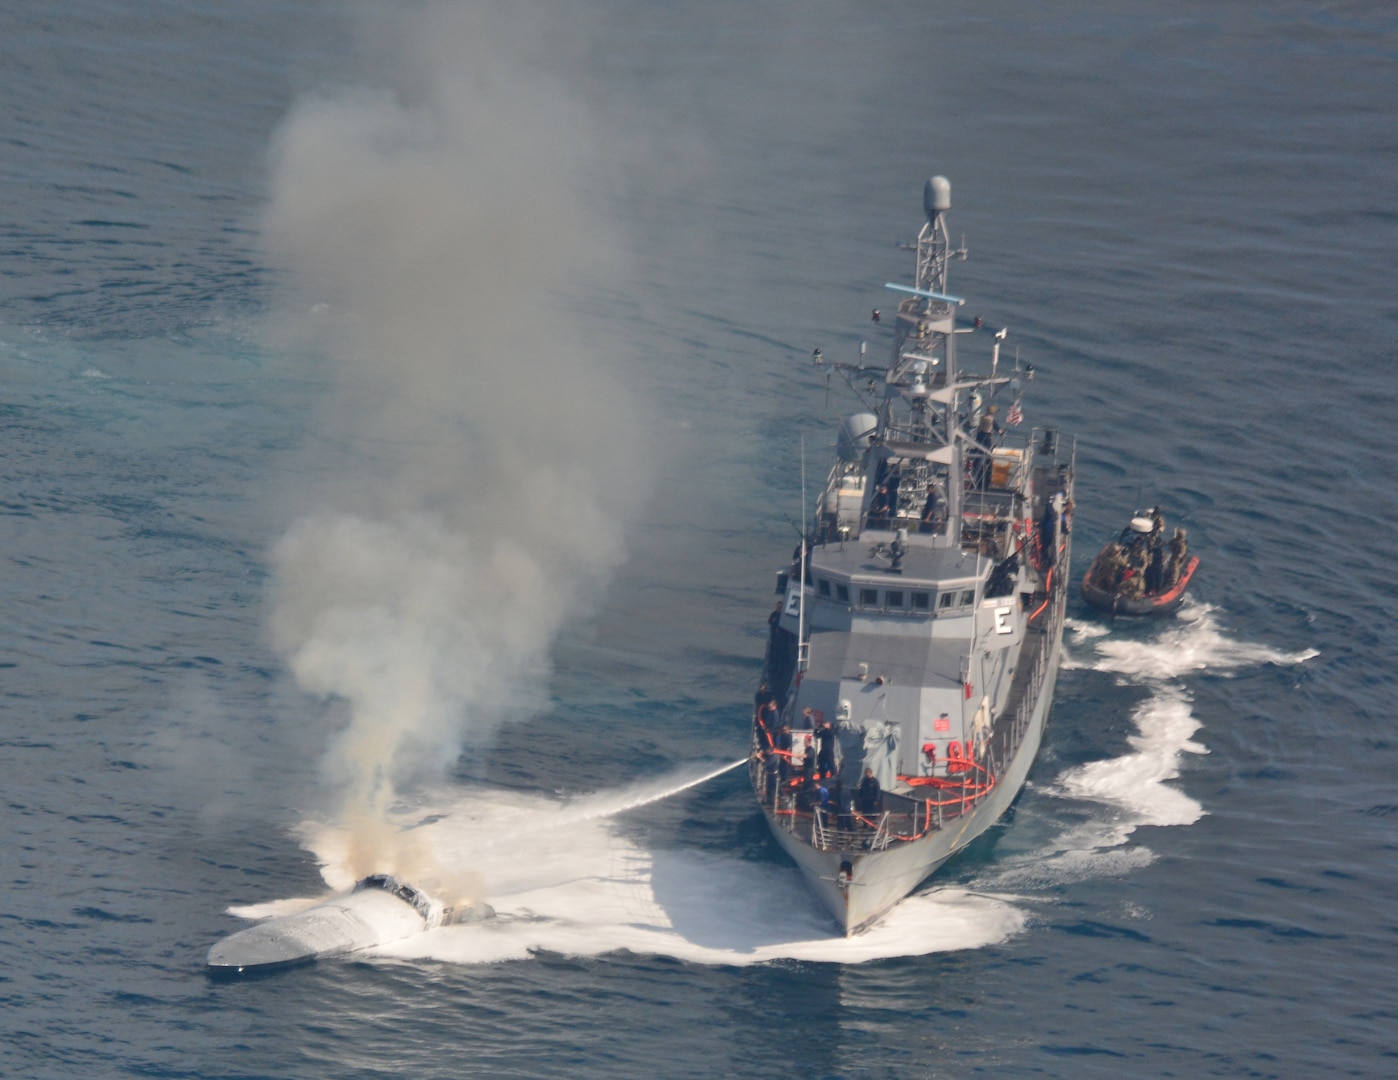 USS Zephyr conducts ship-to-ship firefighting to extinguish a fire aboard a low-profile go-fast vessel.